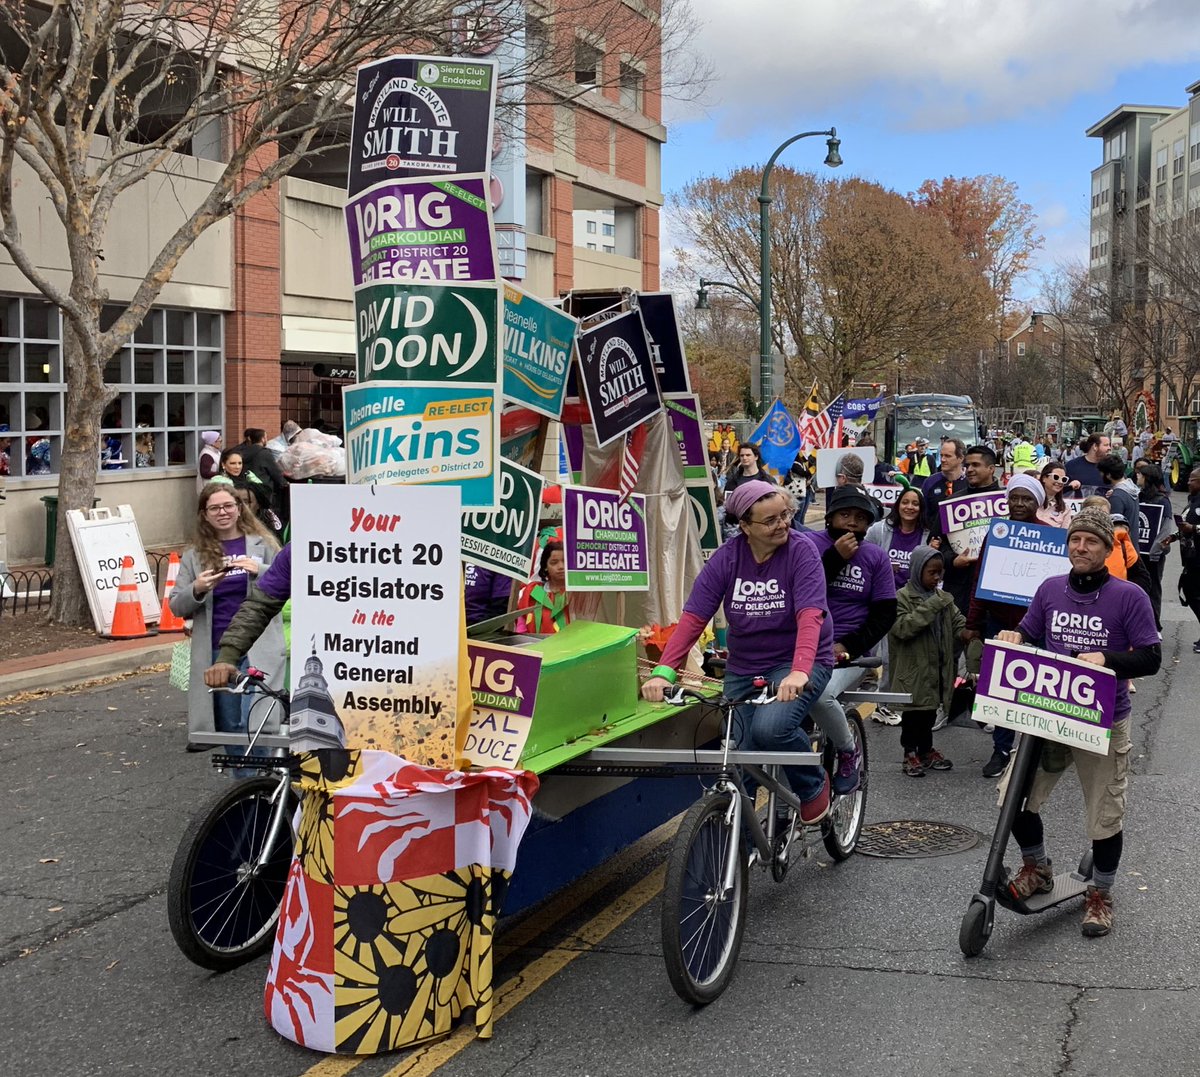 Team Lorig in the DTSS Thanksgiving parade - w/ fresh vegetables, a heat pump because #ElectrifyEverything, Offshore Wind because 100% #CleanEnergy, our #peoplepowered float, & basil seeds for the crowds for kitchen herbs all winter long. Plus my amazing #D20 teammates.